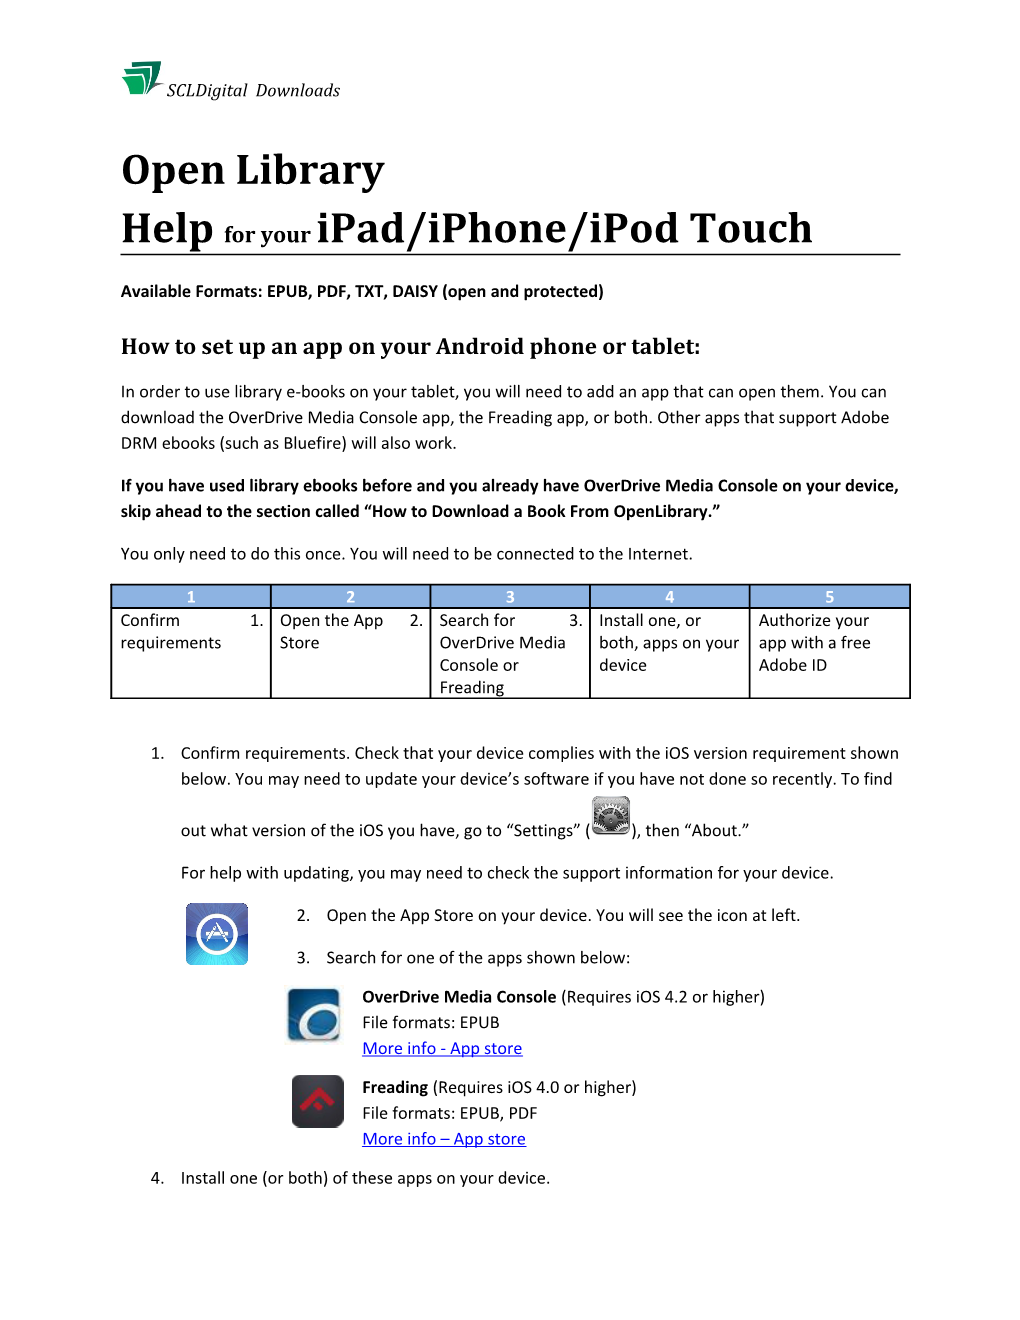 Open Library Helpfor Youripad/Iphone/Ipod Touch